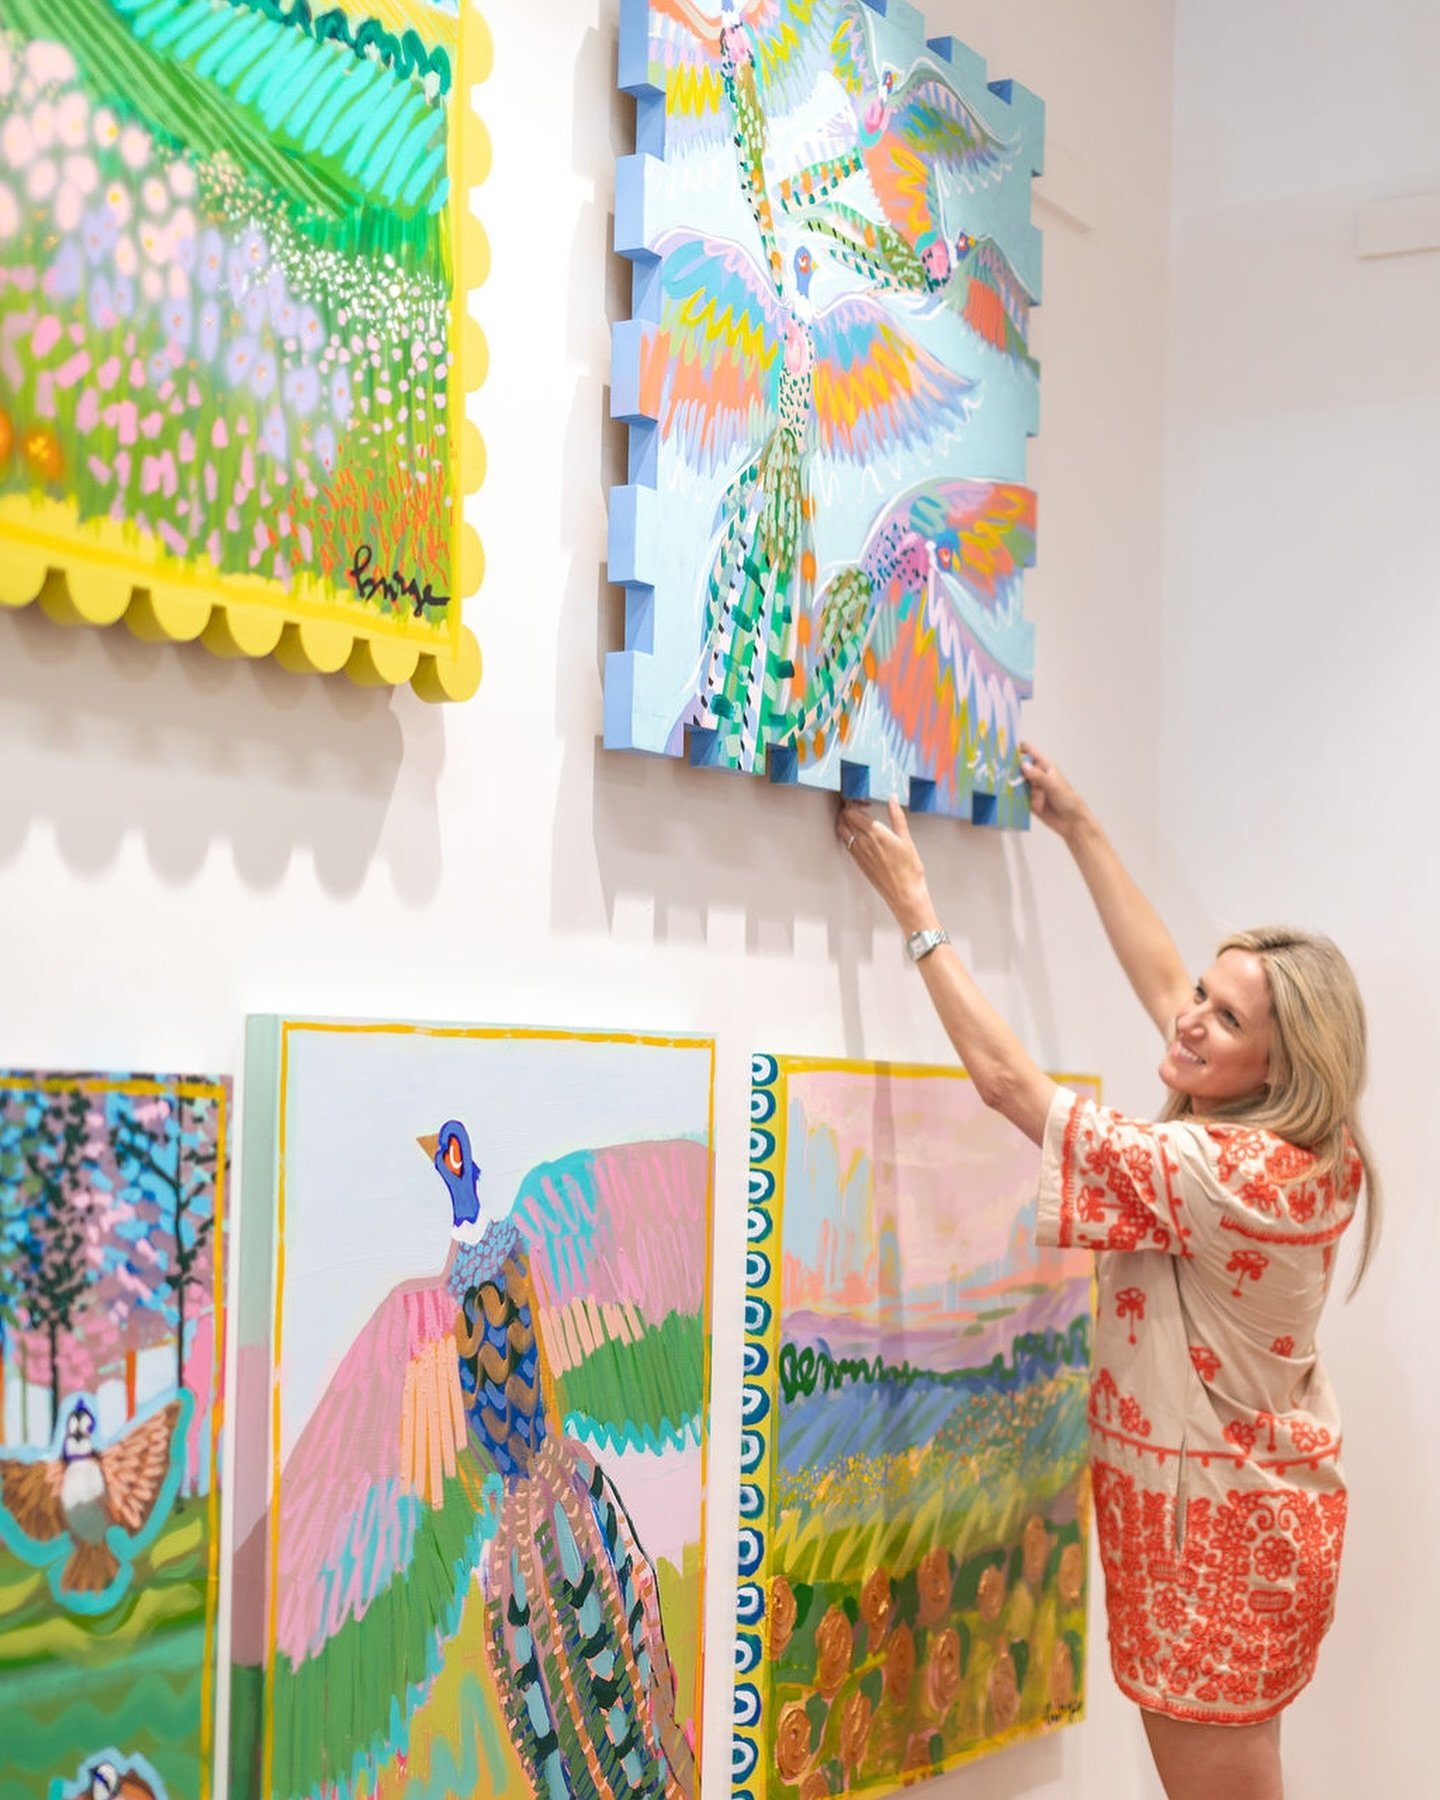 We can&rsquo;t take our eyes off these bright new arrivals by Elaine Burge! 🌸🍃

Elaine grew up in northeastern Georgia on 23 acres with a family that enjoyed the outdoors and encouraged her creativity. With a BA in Fine Arts from UGA, she launched 